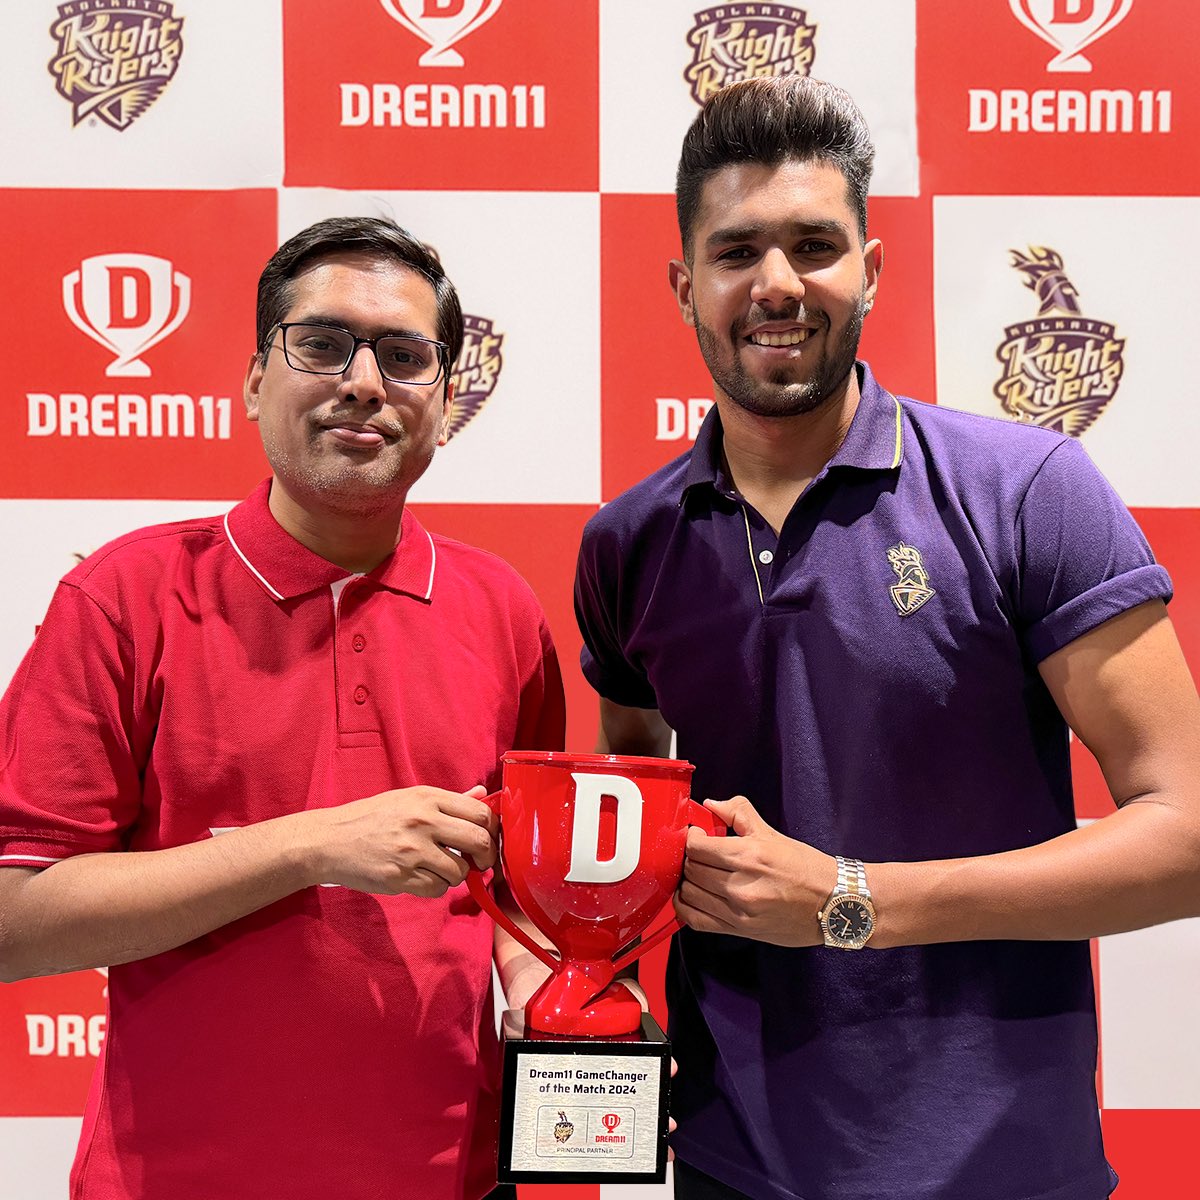 The @Dream11 Champion fan presenting Harshit Rana with the #Dream11GameChanger Award for the fantasy points in last night’s match - 99 points!